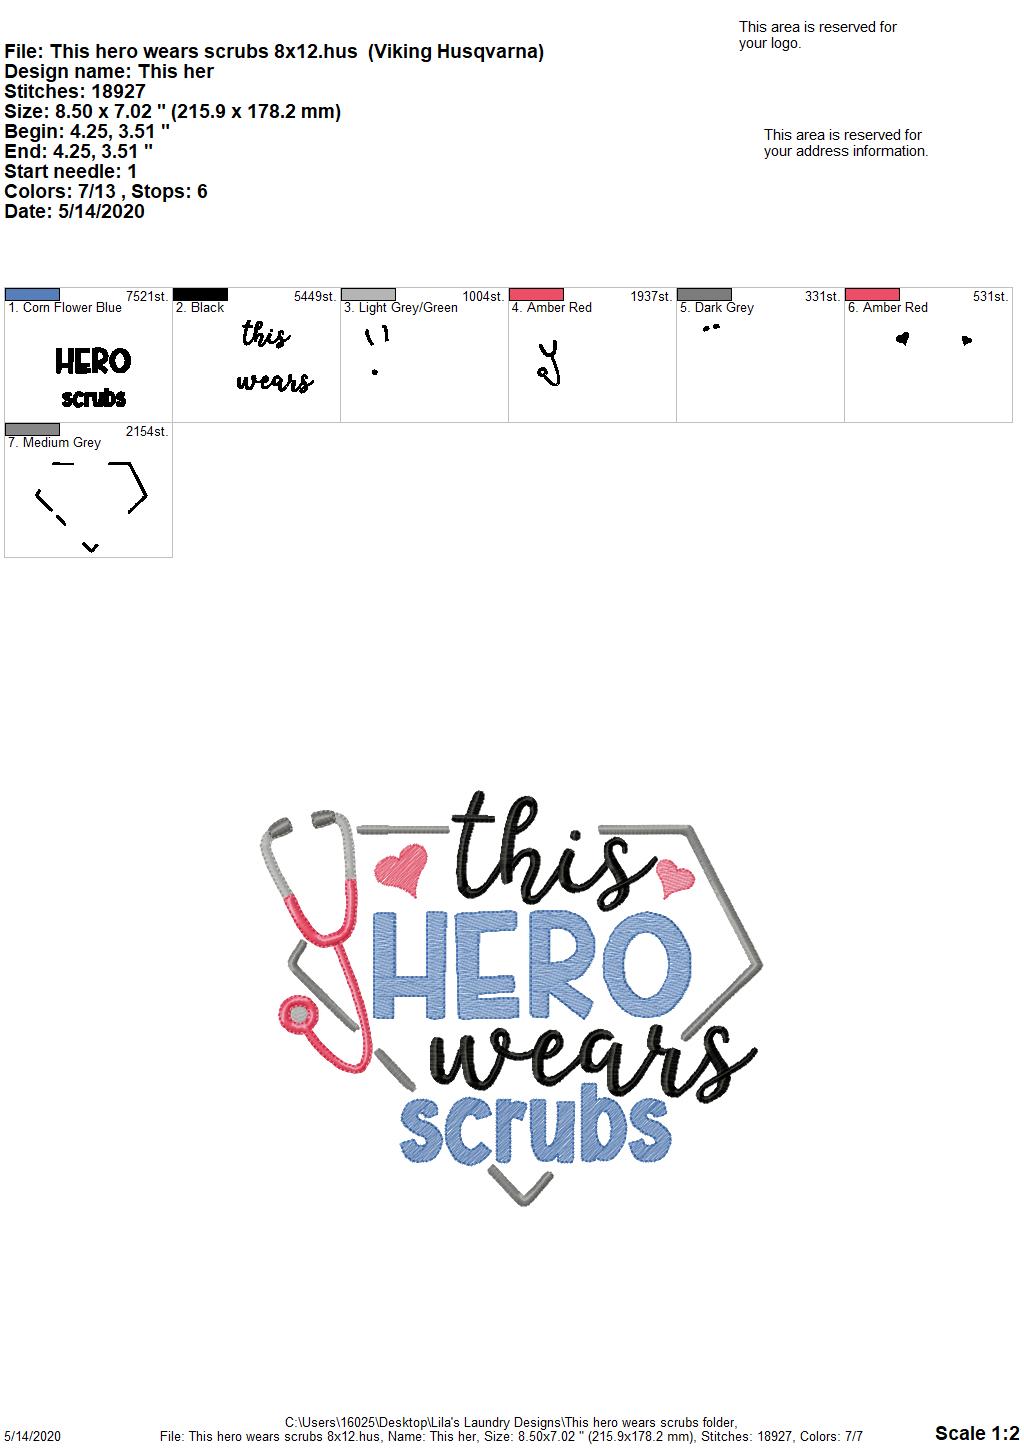 This hero wears scrubs - 3 Sizes - Digital Embroidery Design